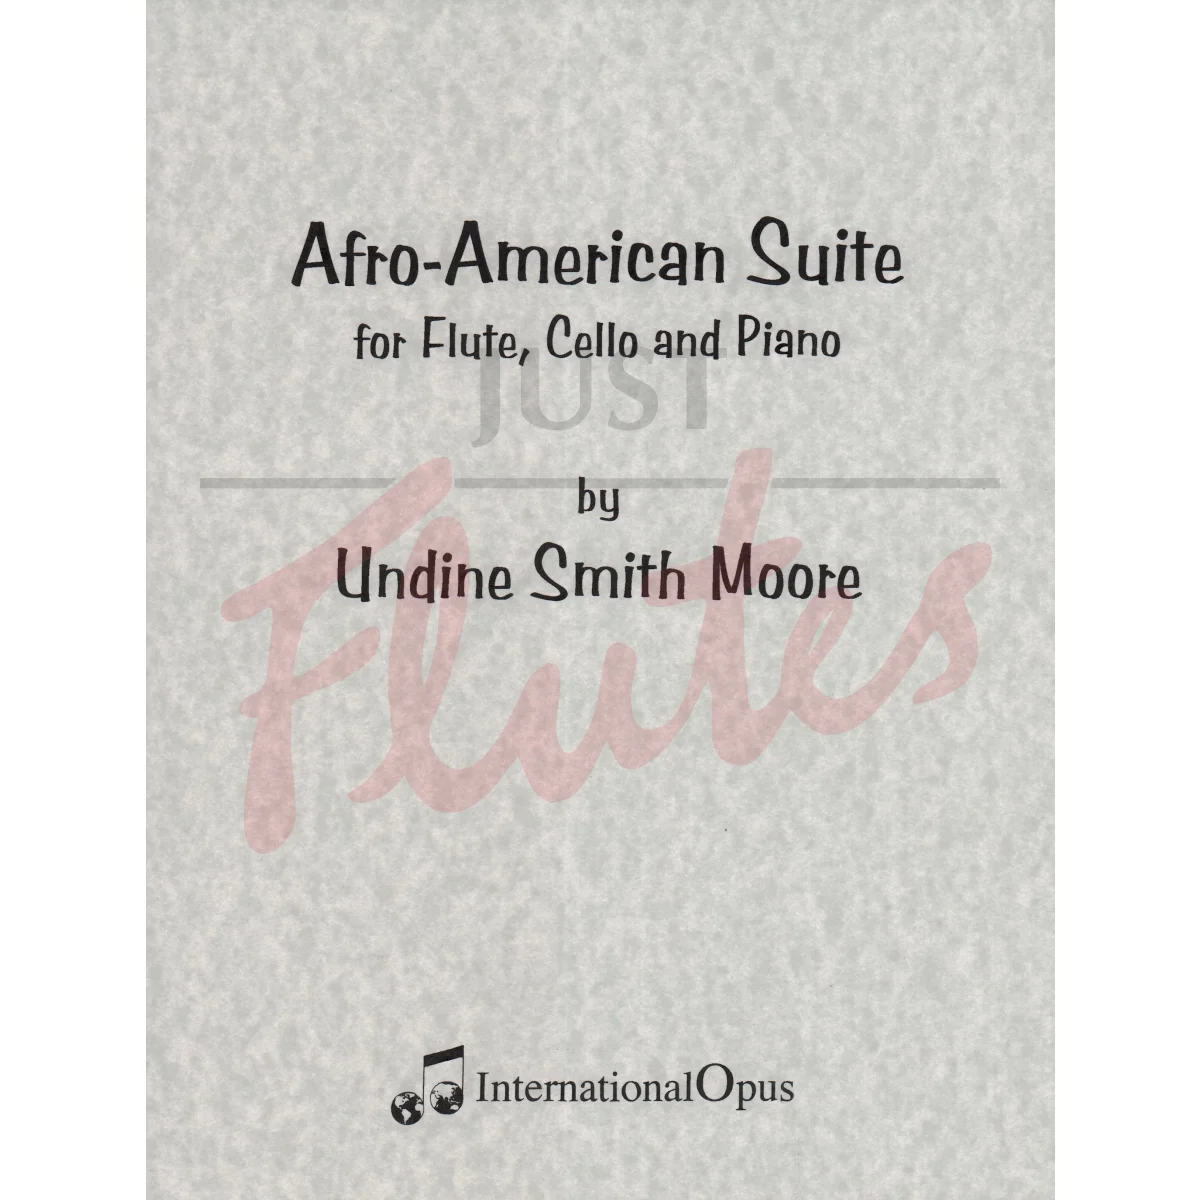 Afro-American Suite for Flute, Cello and Piano